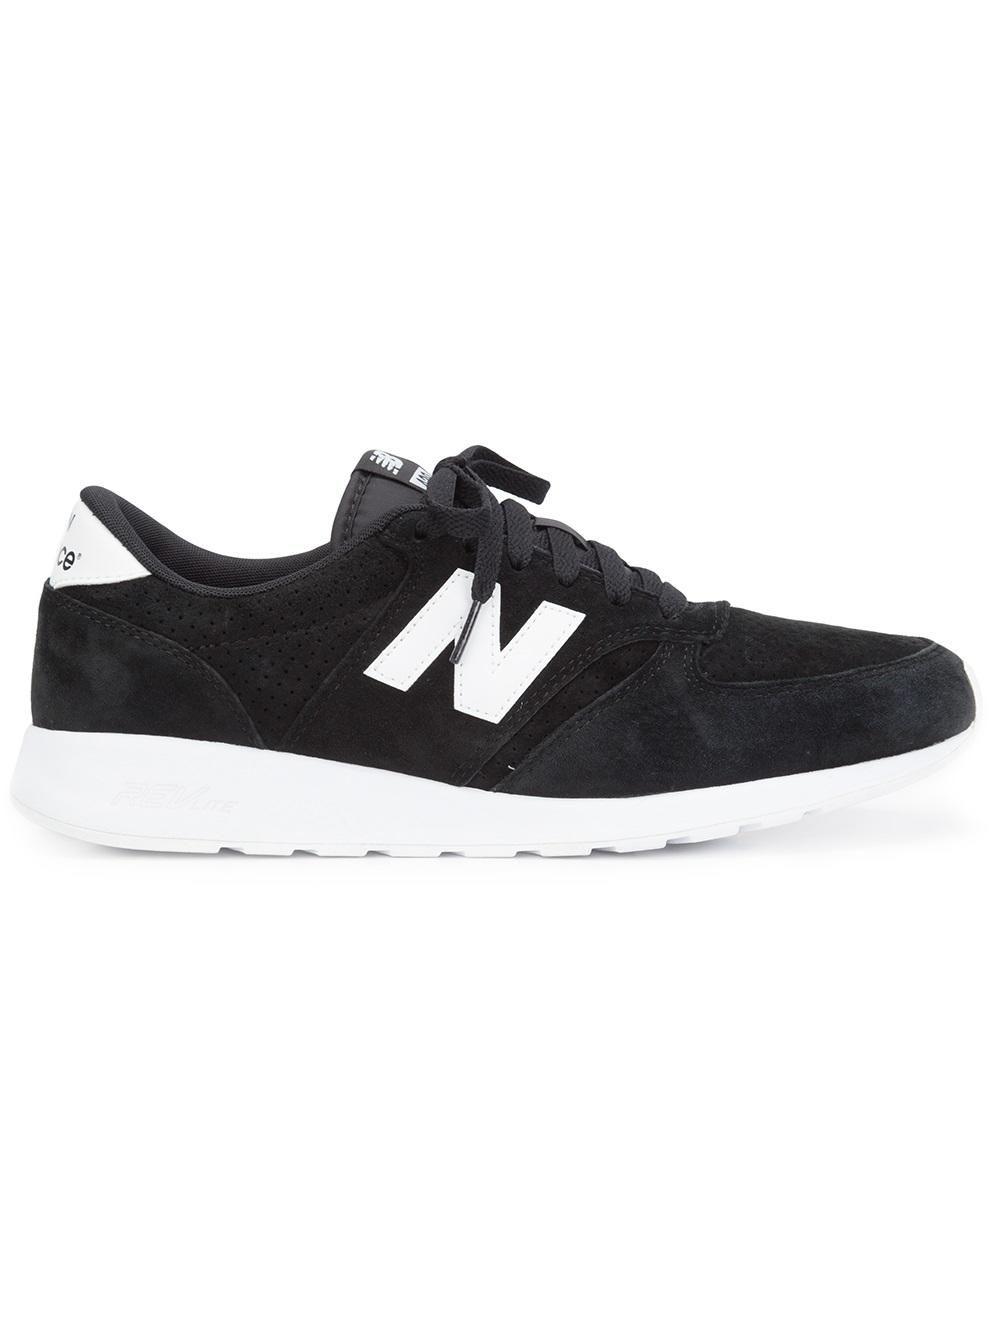 Official New Balance Logo - New Balance logo sneakers Men Shoes, new balance outlet, cheap new